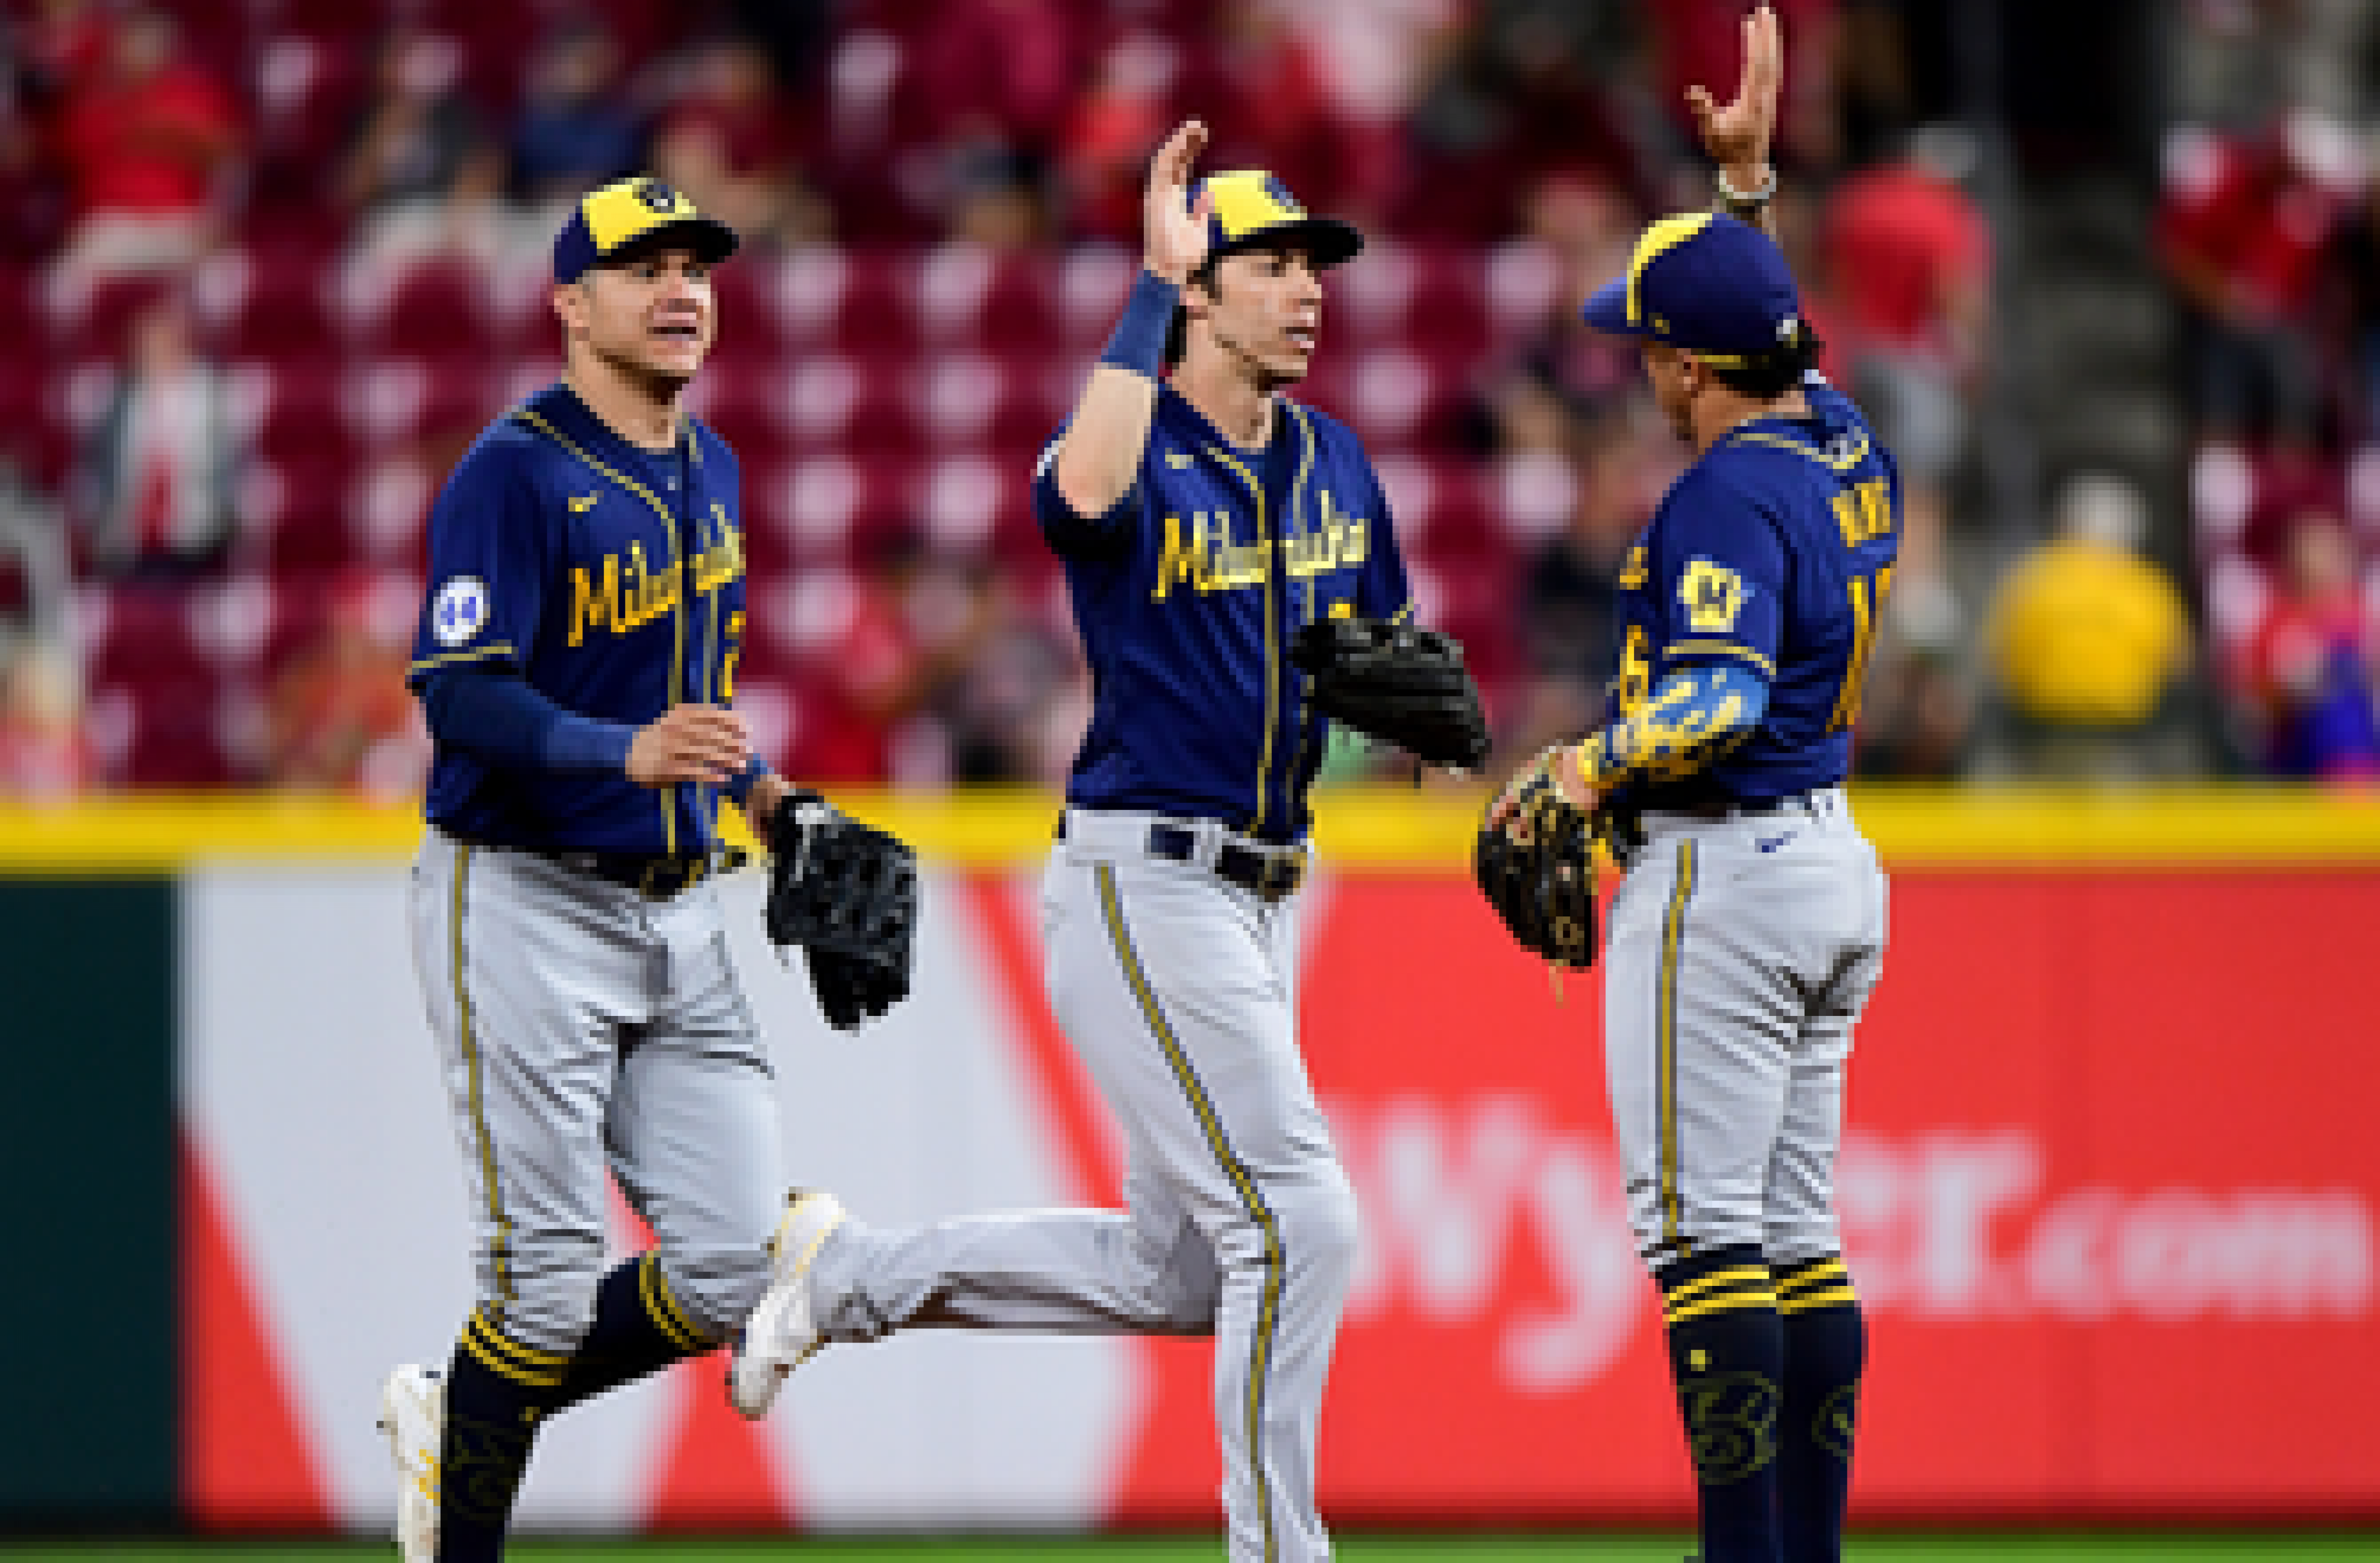 Brewers break away late in 11th inning, edge past Reds 7-4